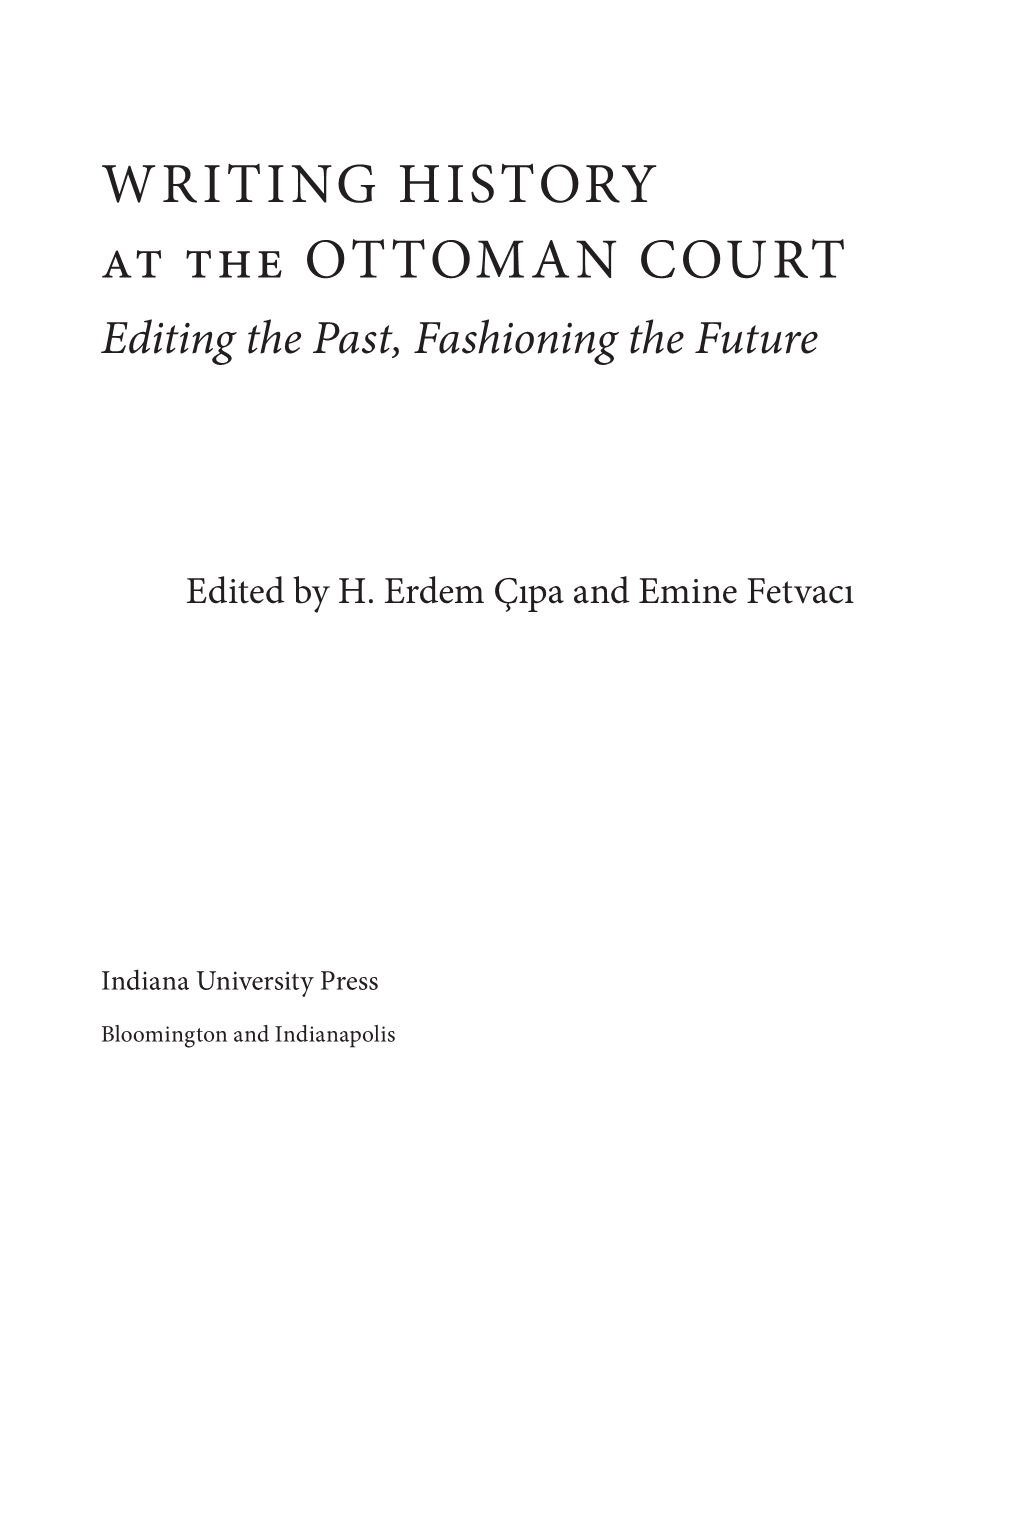 WRITING HISTORY at the OTTOMAN COURT Editing the Past, Fashioning the Future